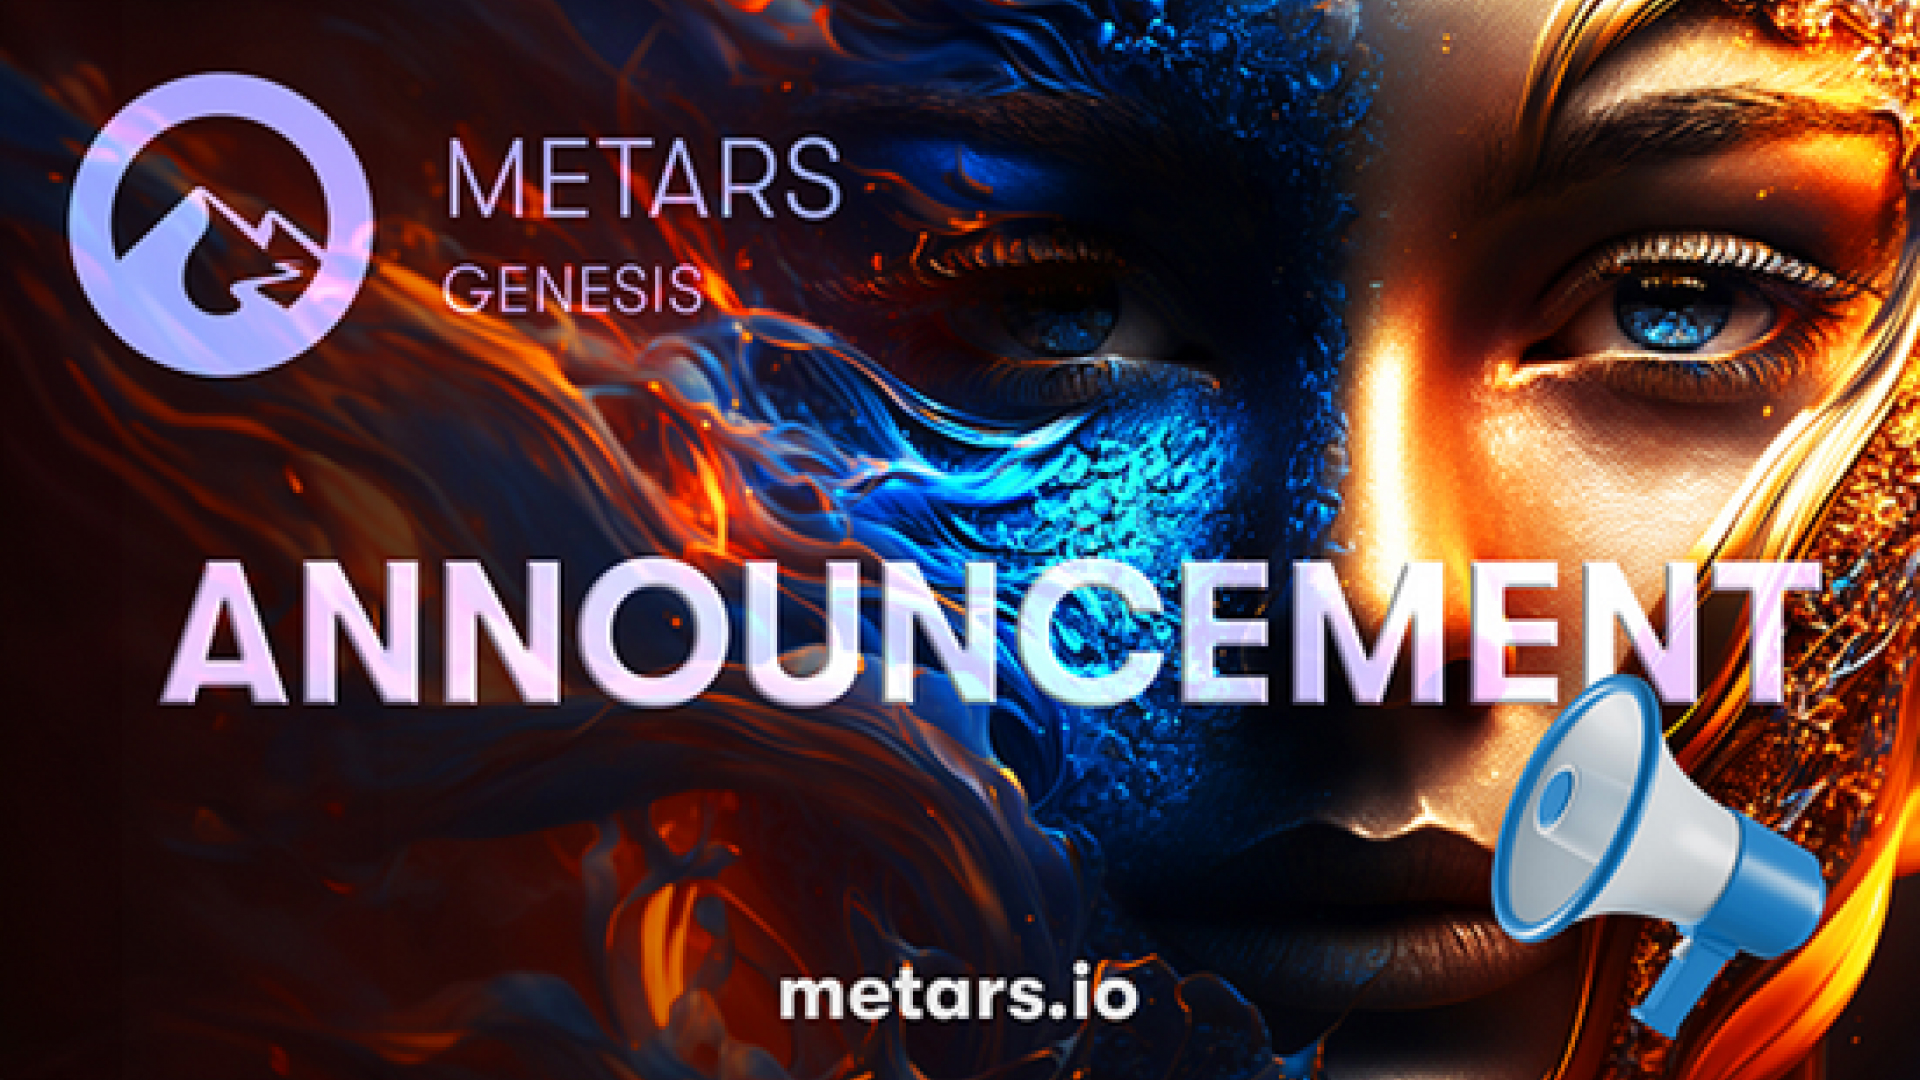 Embracing AI Technology, Metars is Undergoing Major Transformation